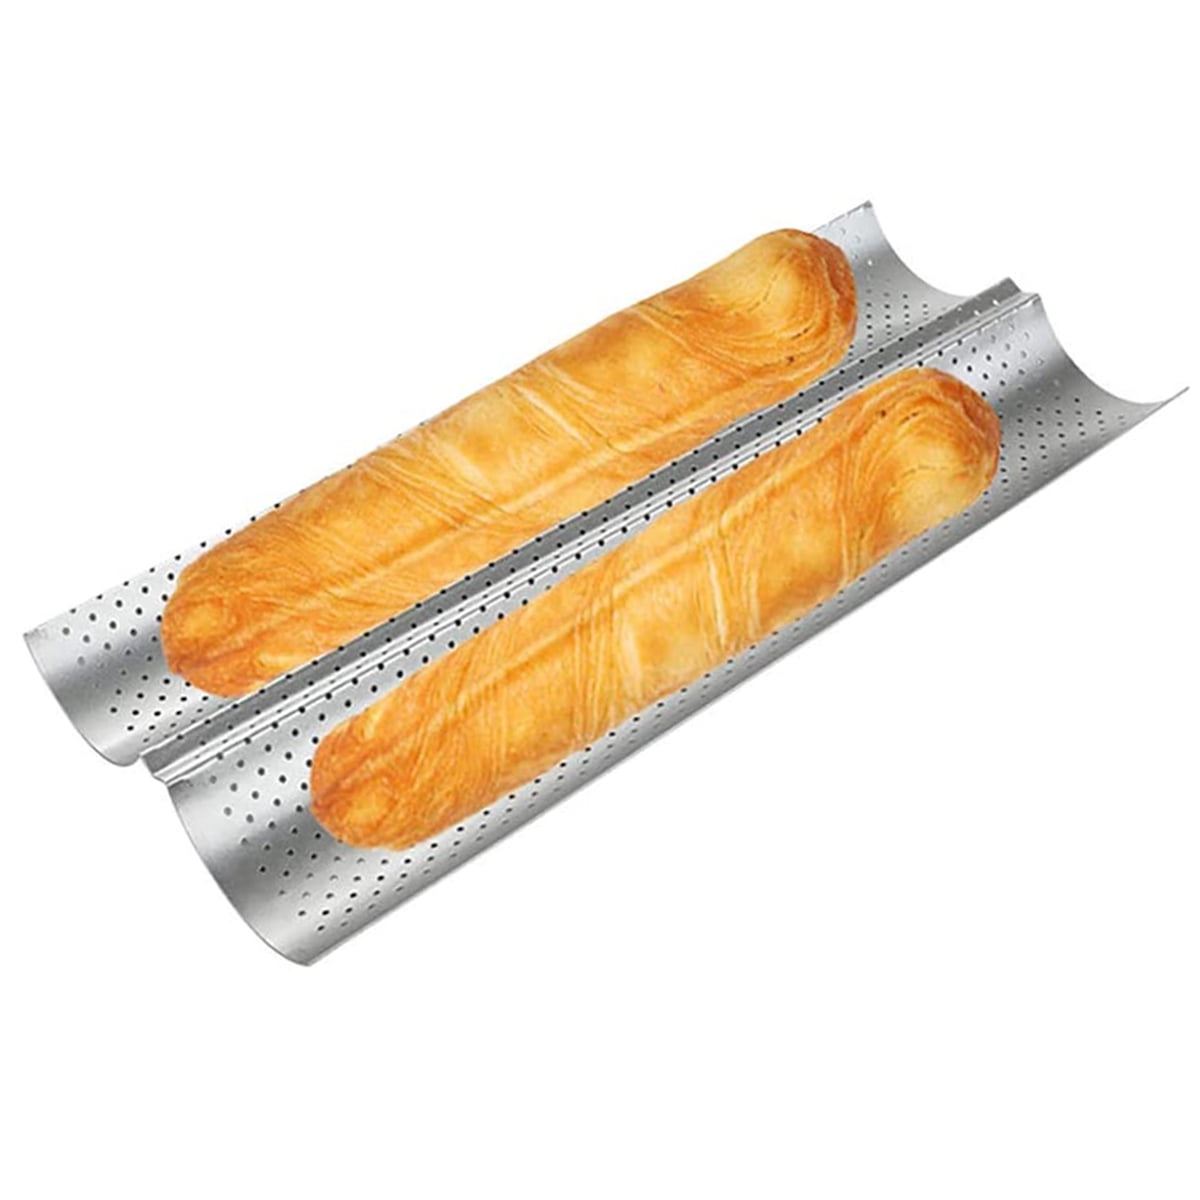 3 grid French Bread Baguette Pan Mold Non-Stick Wave Loaf Bake Baking Mould NEW